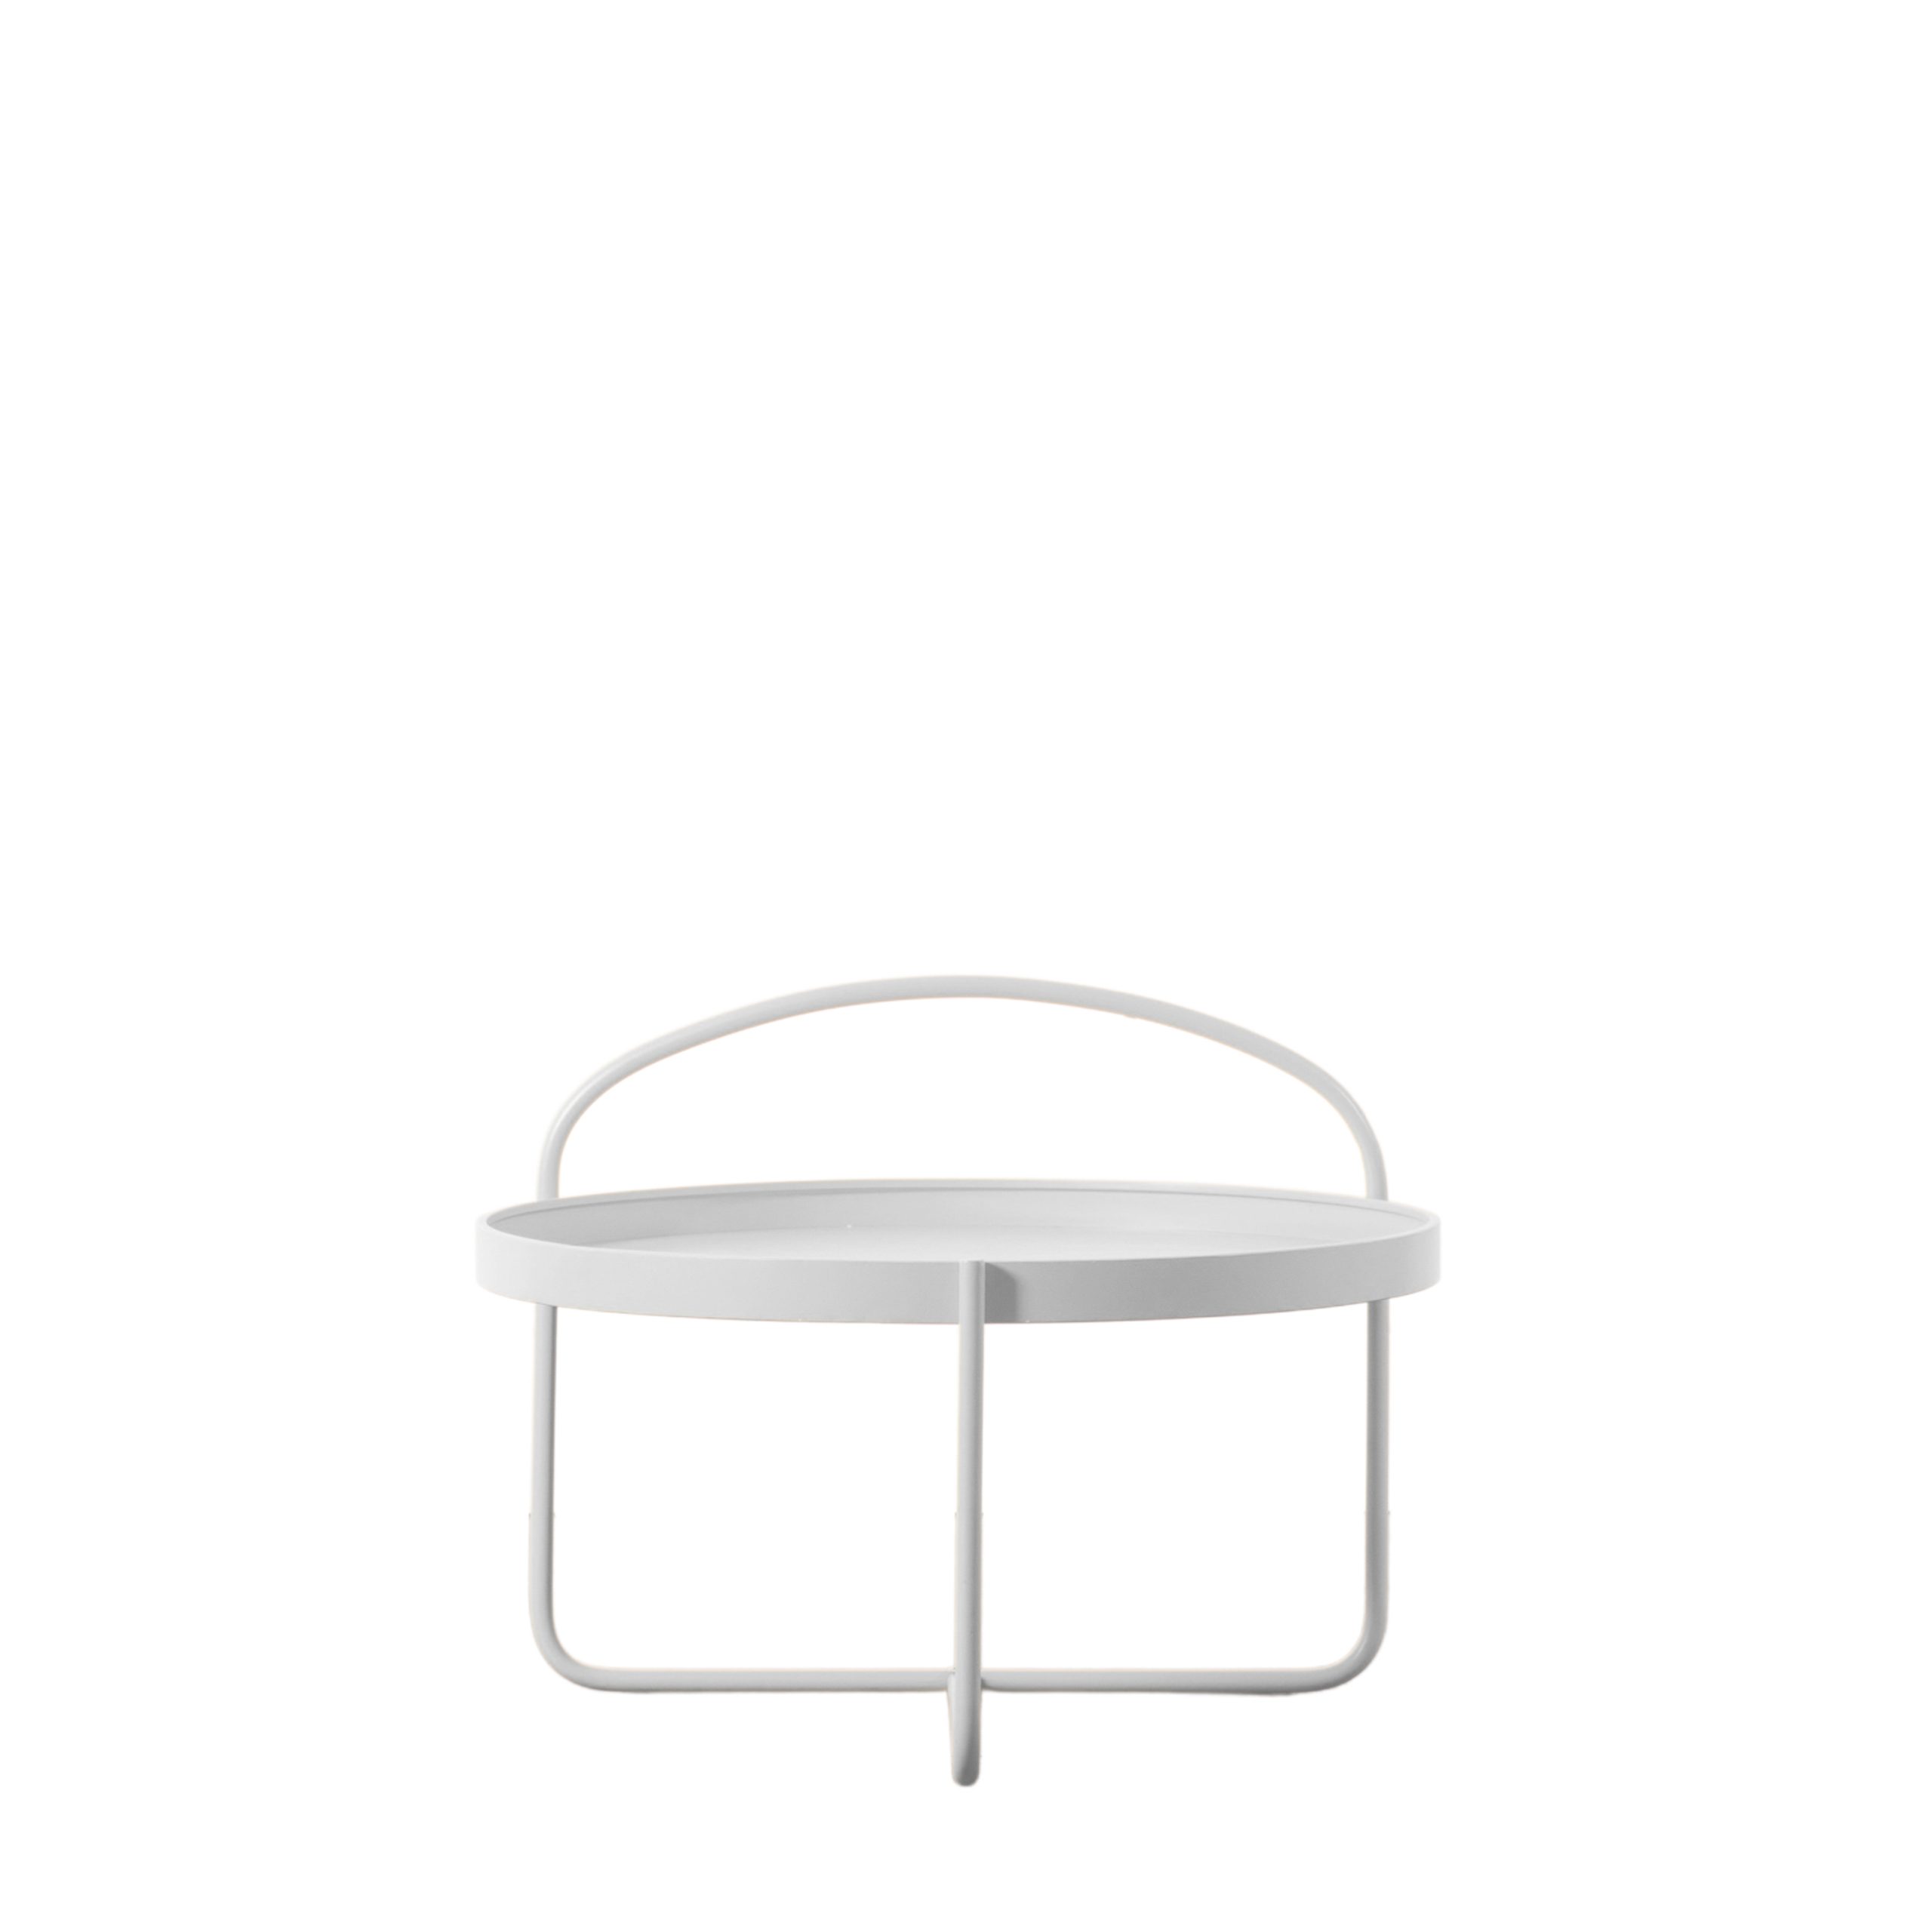 Gallery Direct Melbury Coffee Table White